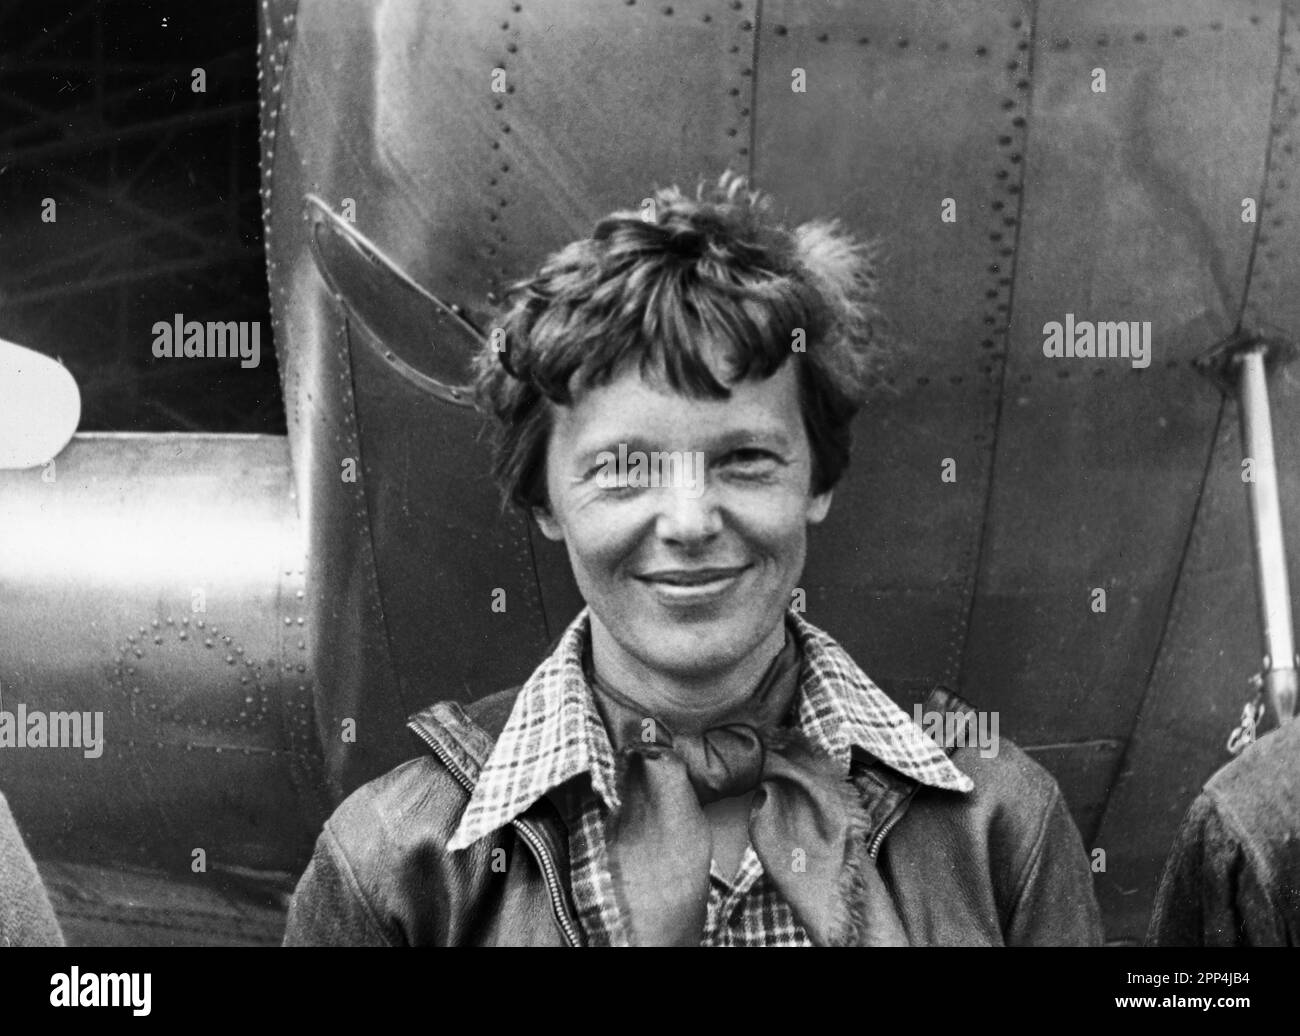 Amelia Earhart standing under nose of her Lockheed Model 10-E Electra. Gelatin silver print, 1937. Photograph by Underwood & Underwood. Location: Cali Stock Photo